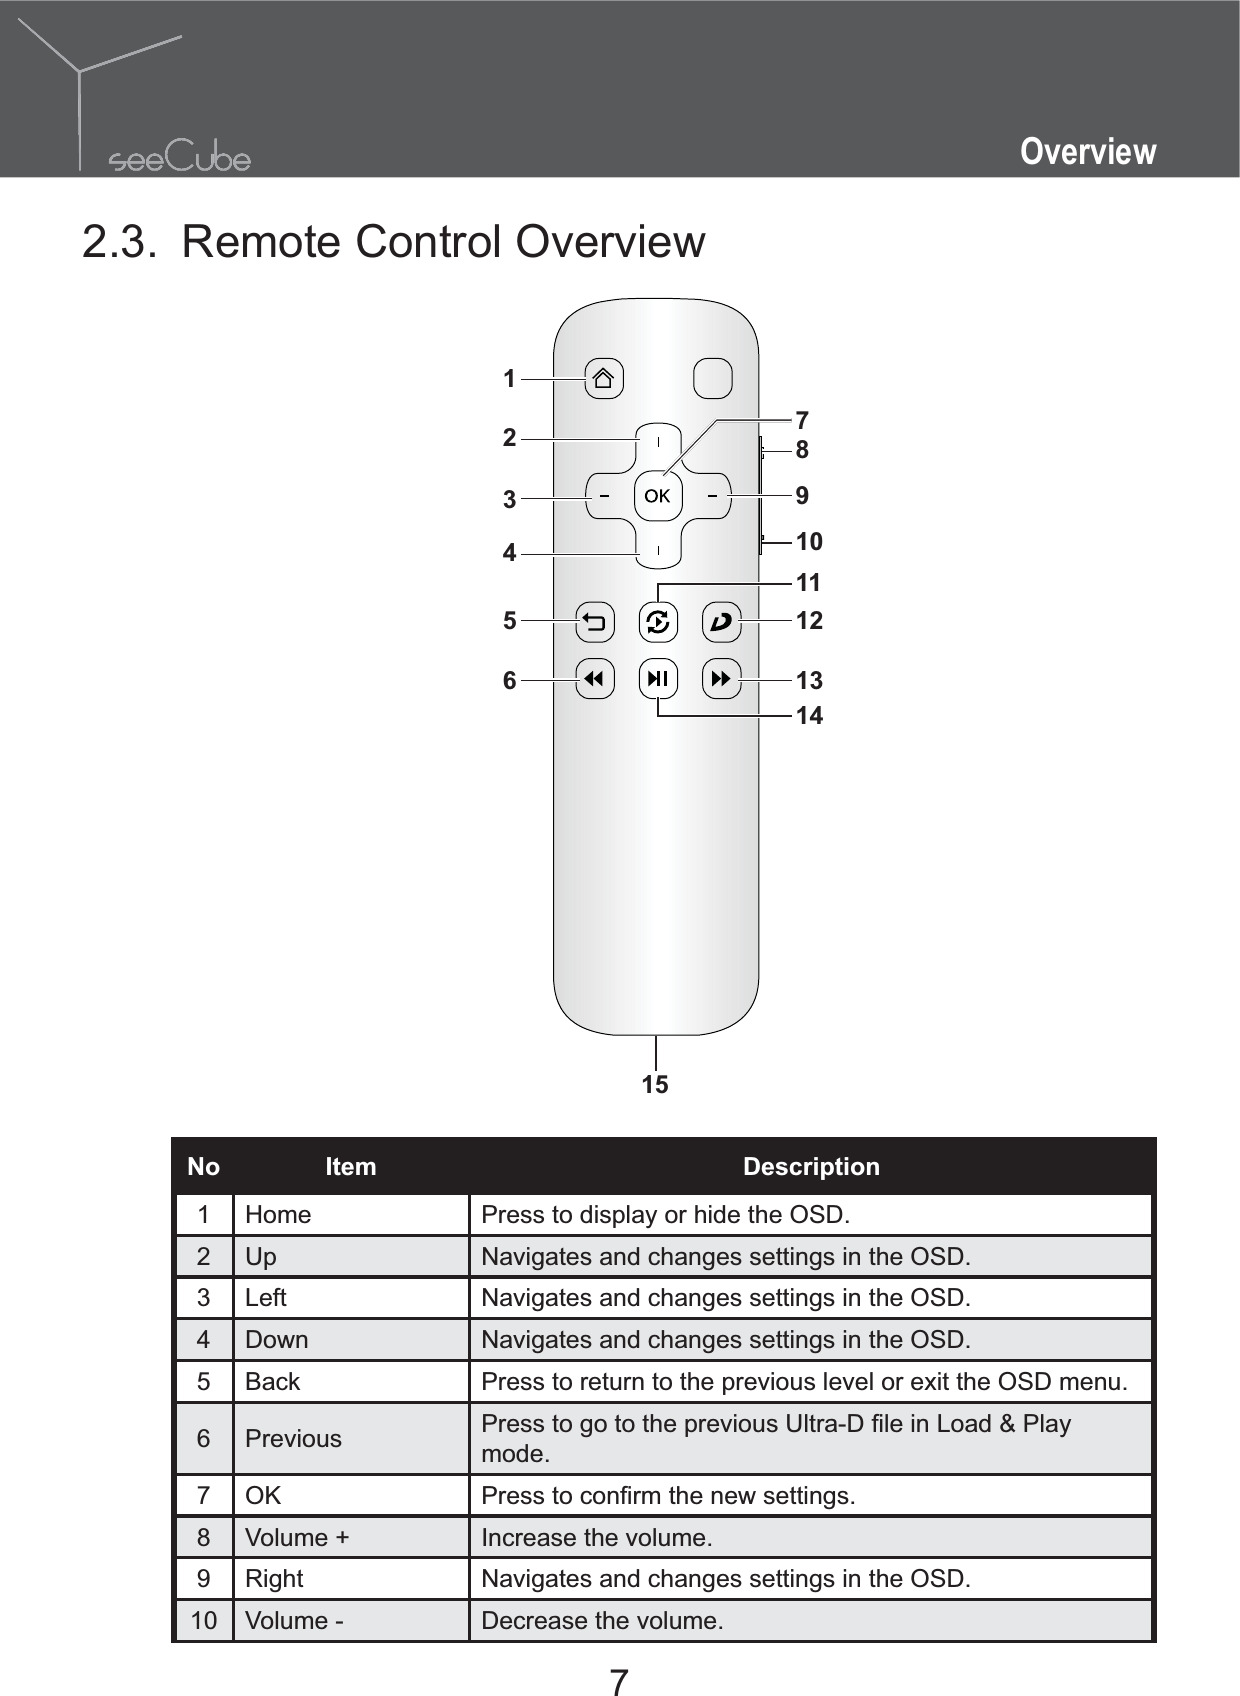 7Overview2.3.  Remote Control Overview123456879101112131514No Item Description1 Home Press to display or hide the OSD.2Up Navigates and changes settings in the OSD.3 Left Navigates and changes settings in the OSD.4 Down Navigates and changes settings in the OSD.5 Back Press to return to the previous level or exit the OSD menu.6 Previous mode.7 OK 8 Volume + Increase the volume.9 Right Navigates and changes settings in the OSD.10 Volume - Decrease the volume.